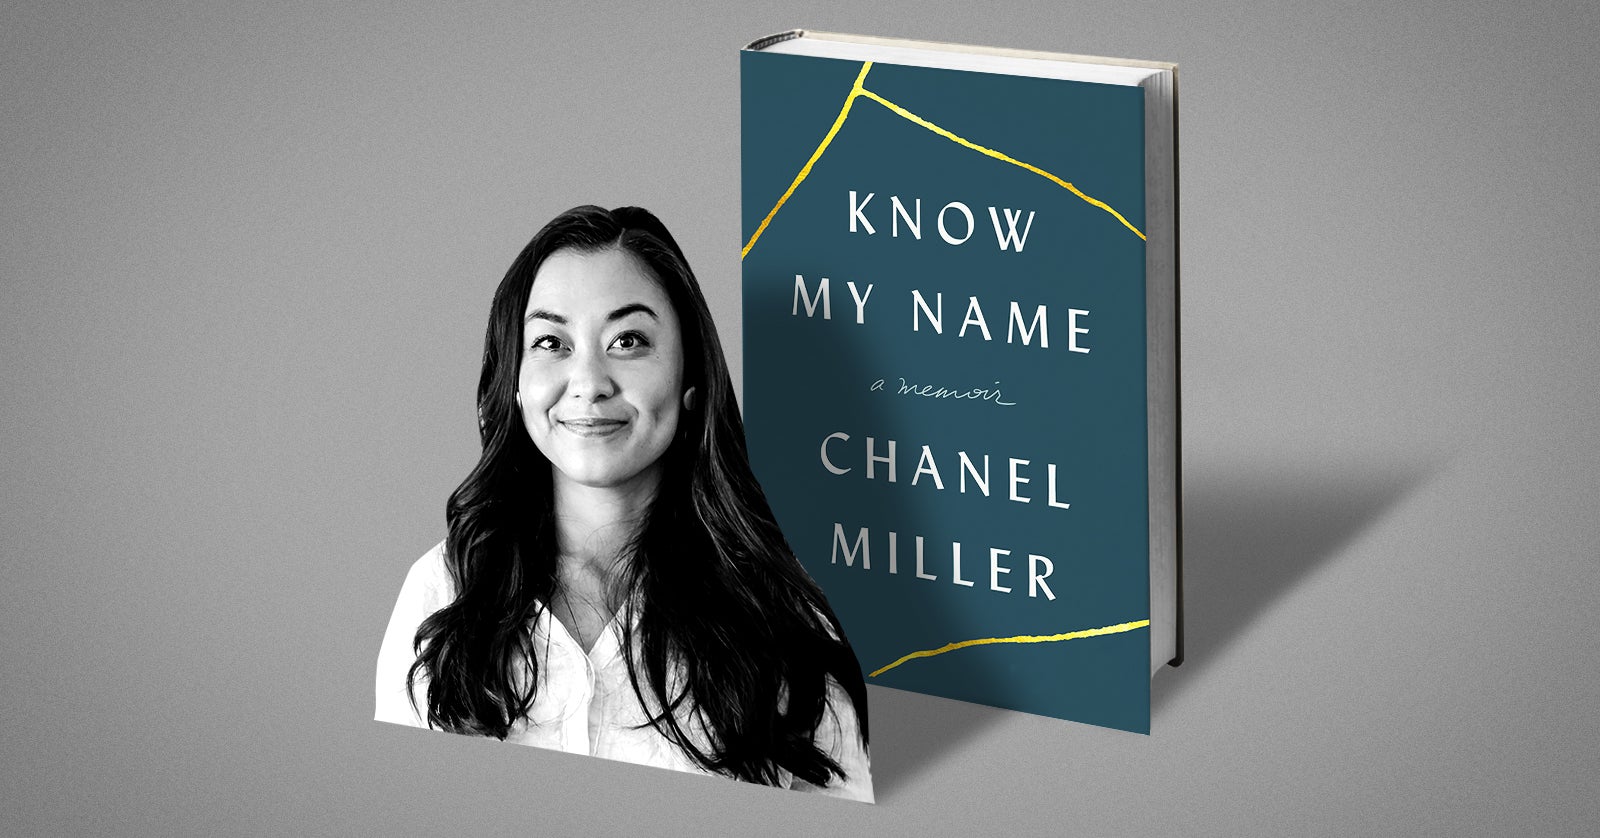 Read This Excerpt From Chanel Miller's Book 